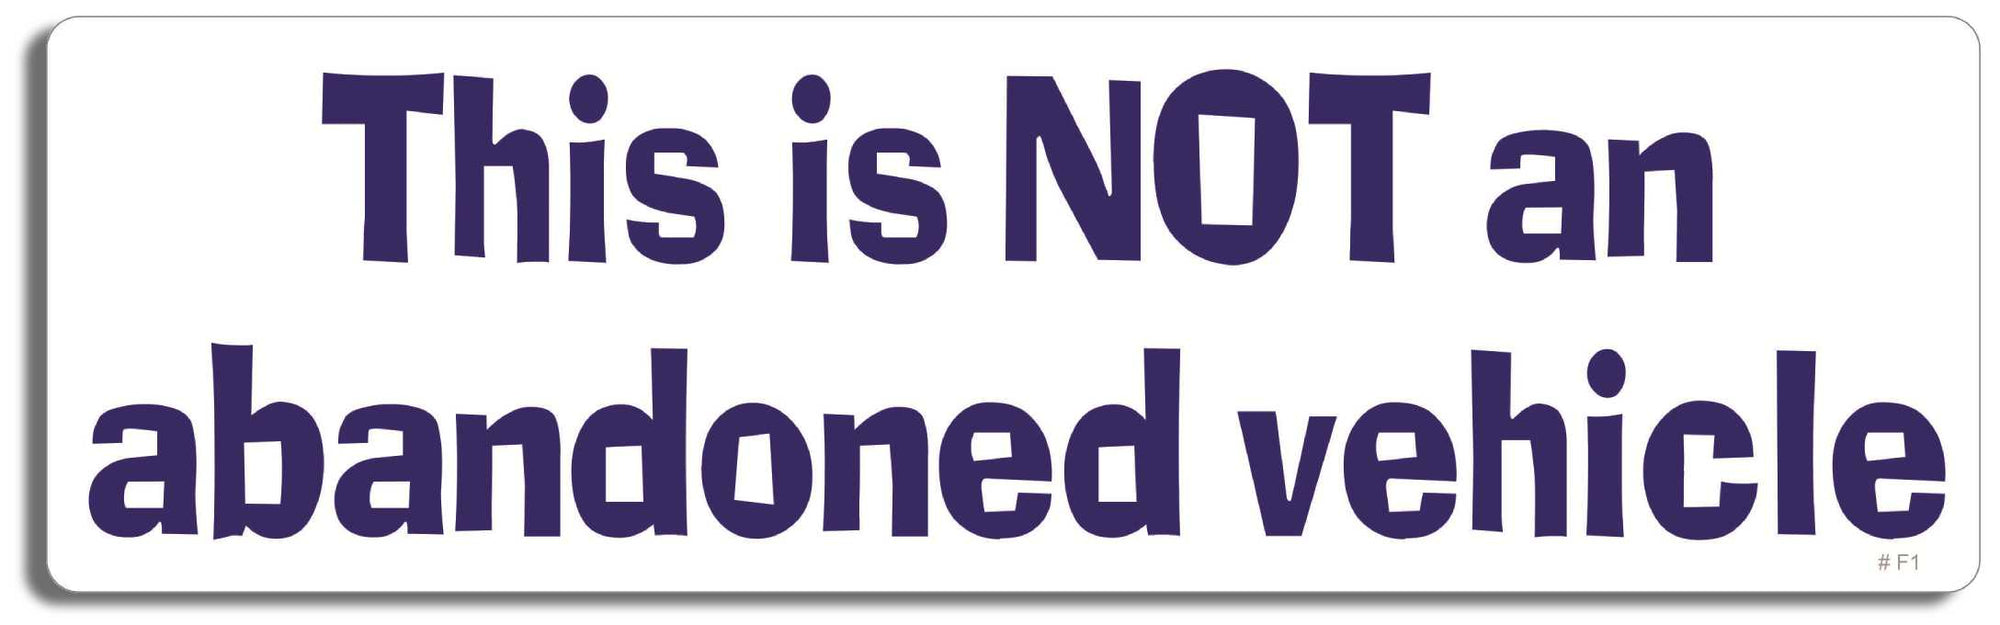 This is not an abandoned vehicle - 3" x 10" Bumper Sticker--Car Magnet- -  Decal Bumper Sticker-funny Bumper Sticker Car Magnet This is not an abandoned vehicle-  Decal for cars funny, funny quote, funny saying